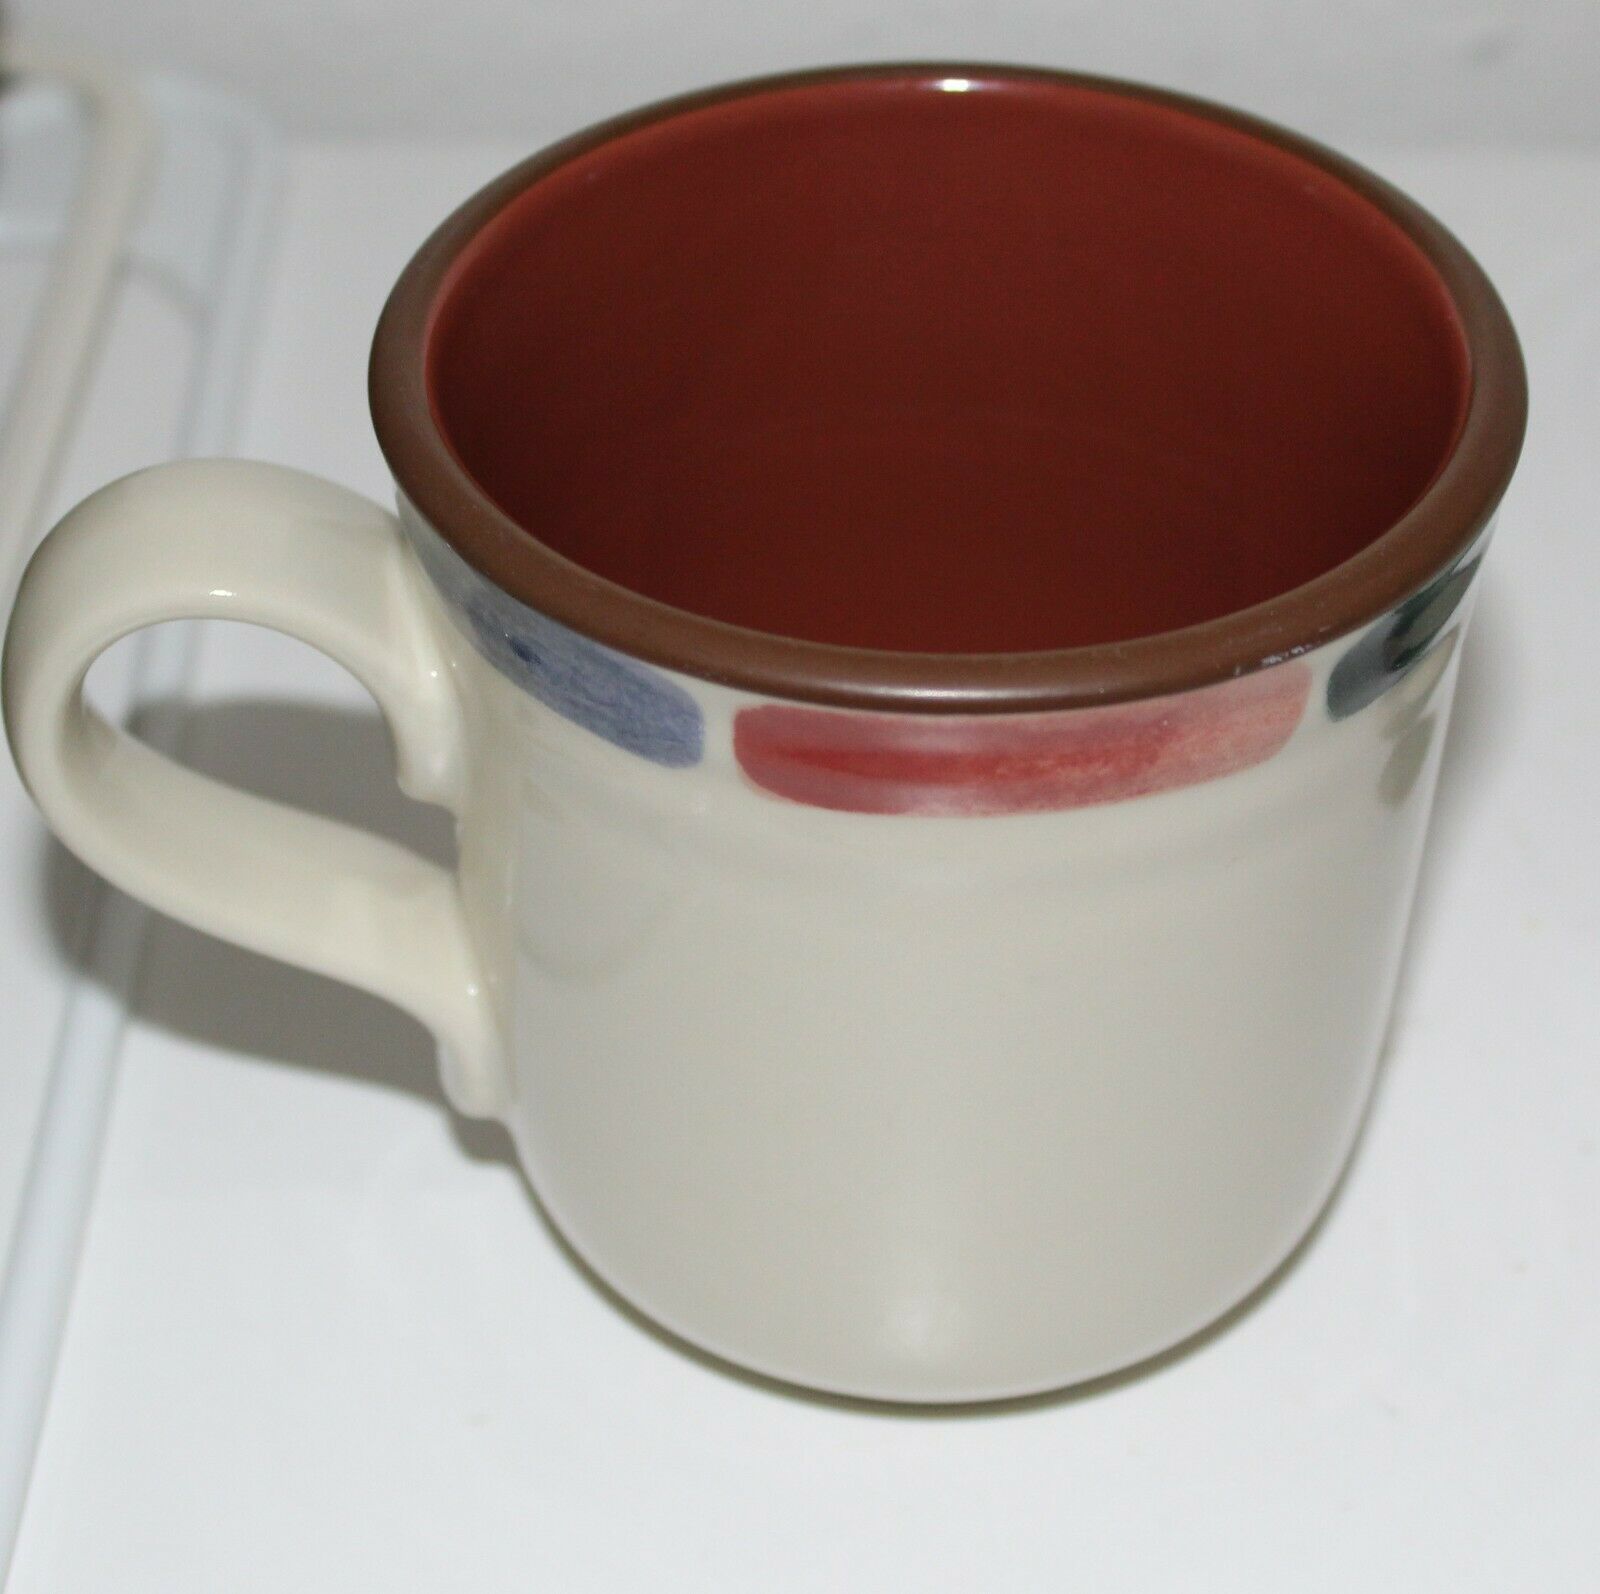 Primary image for Noritake Stoneware Warm Sands 1 Coffee Tea Mug Cups Replacement